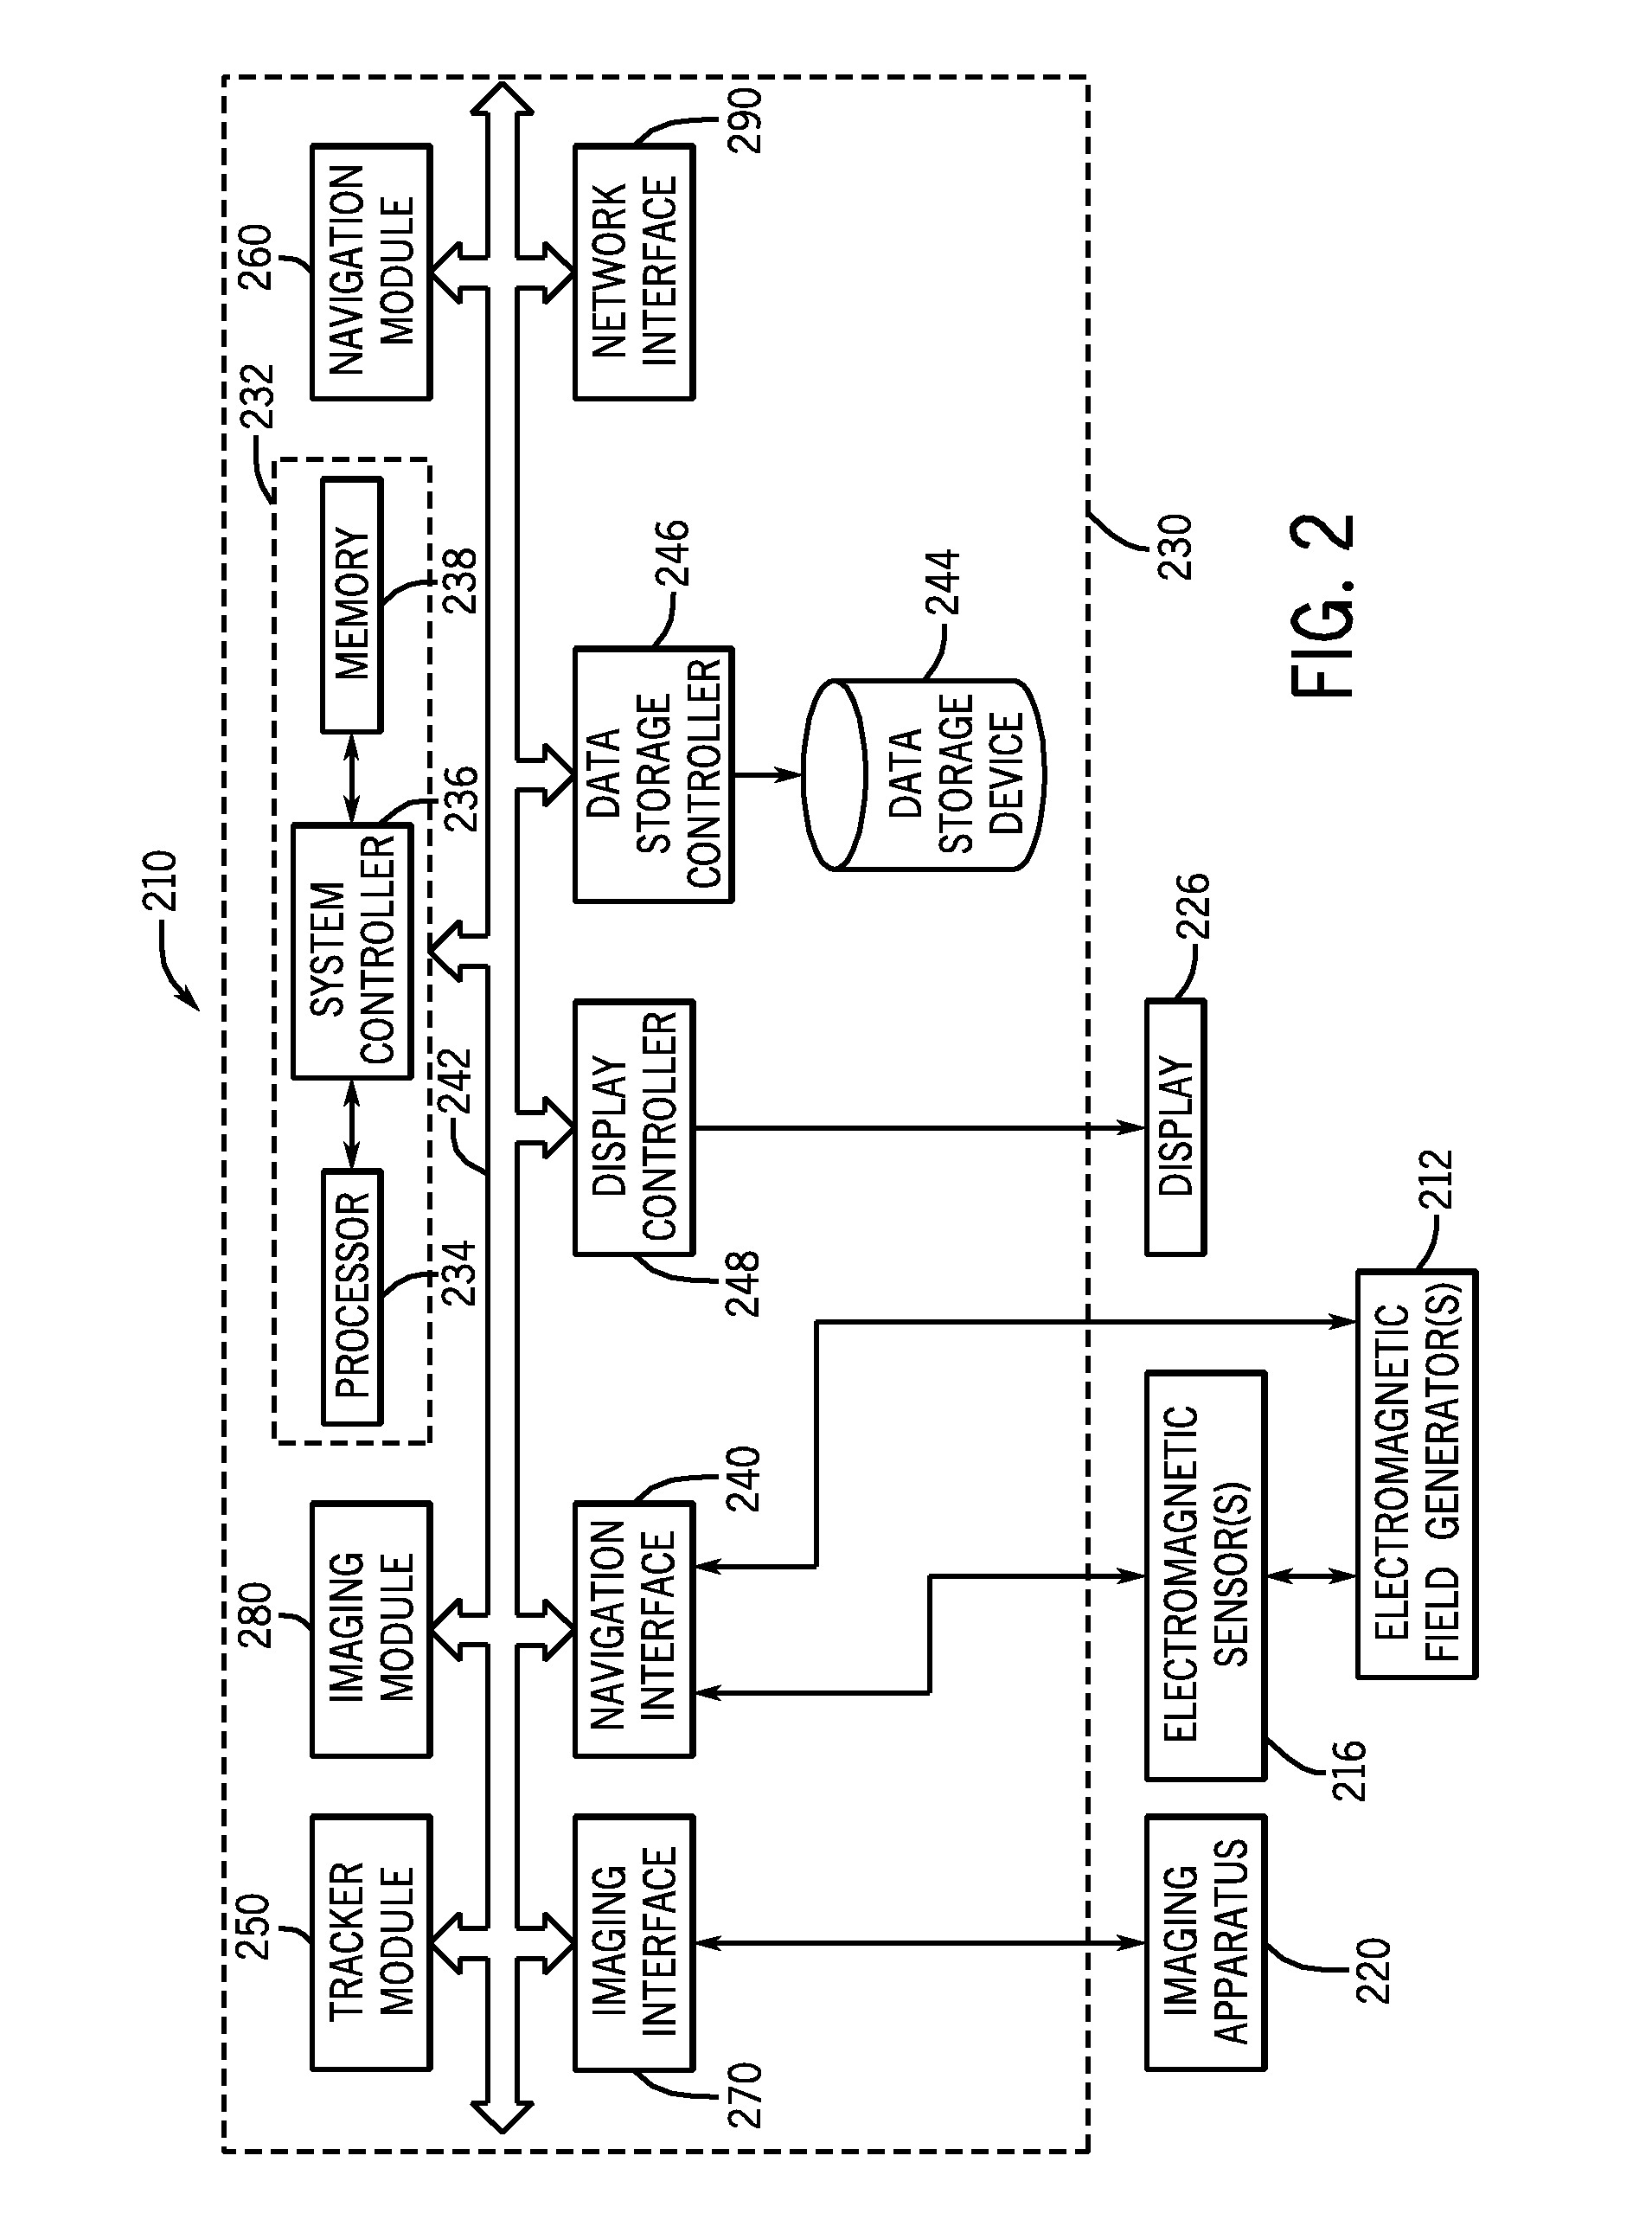 System and method for sharing medical information between image-guided surgery systems